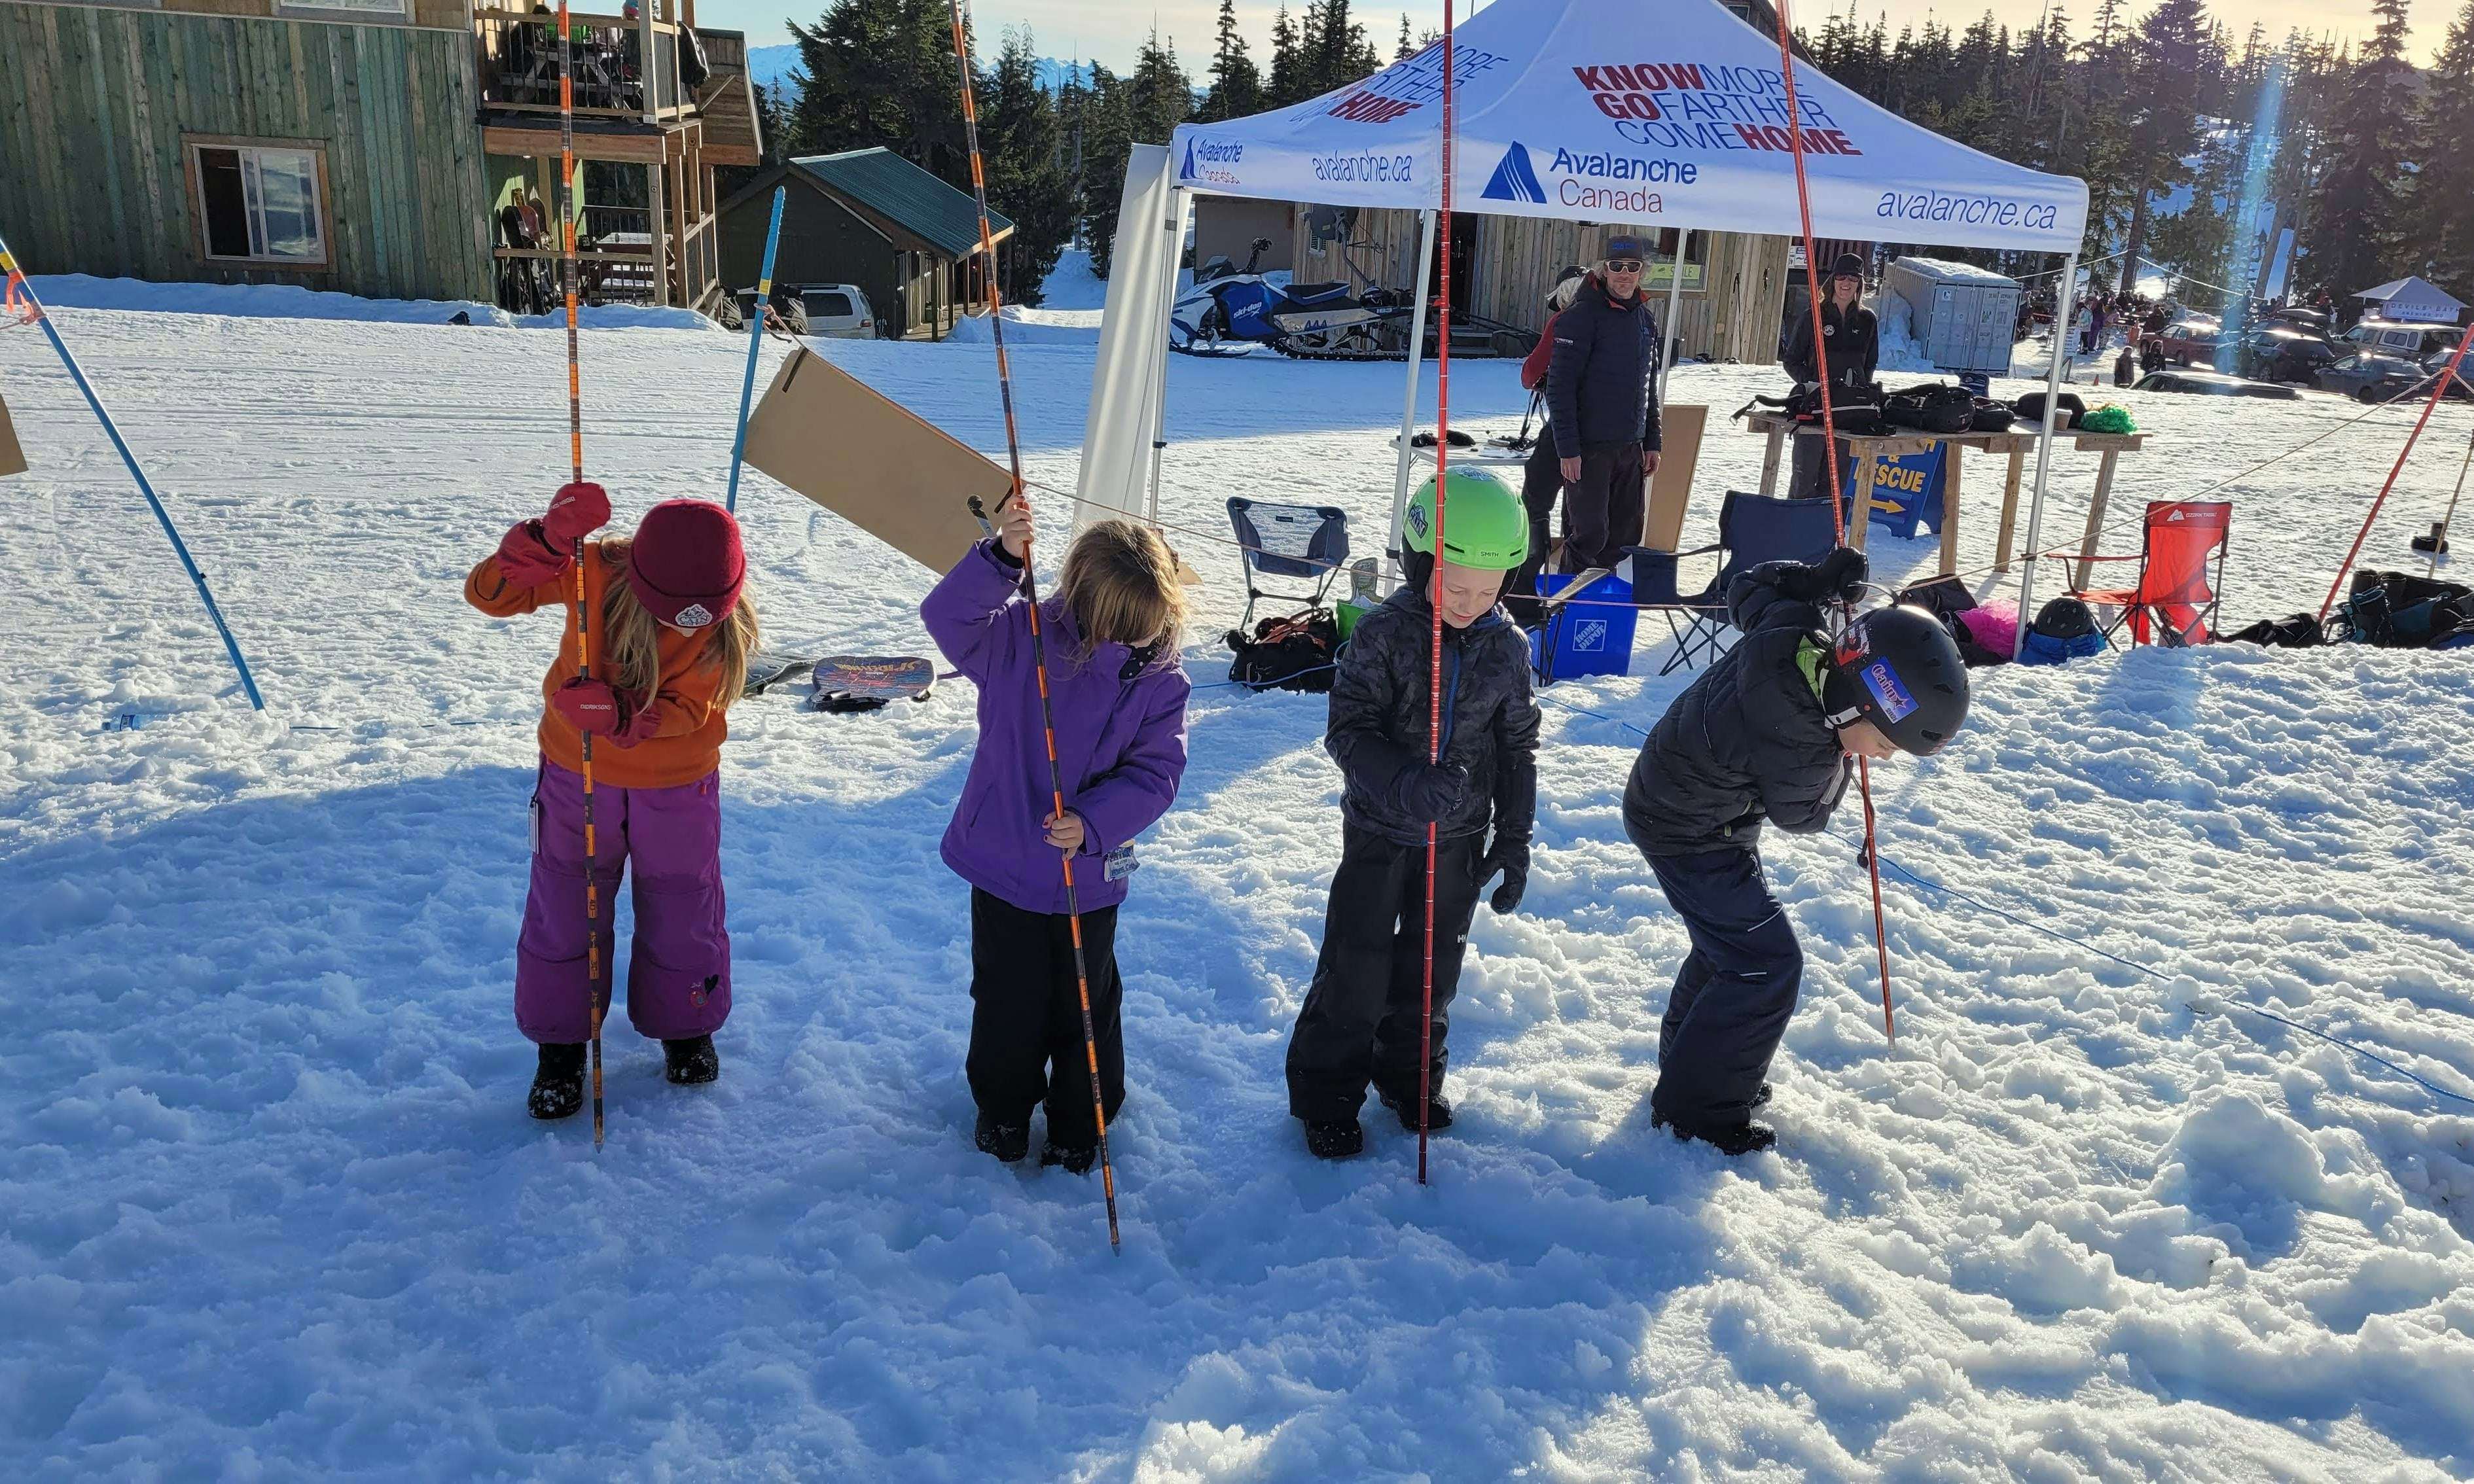 Photo: Avalanche Canada outreach team at on Vancouver Island an event during Avalanche Awareness week